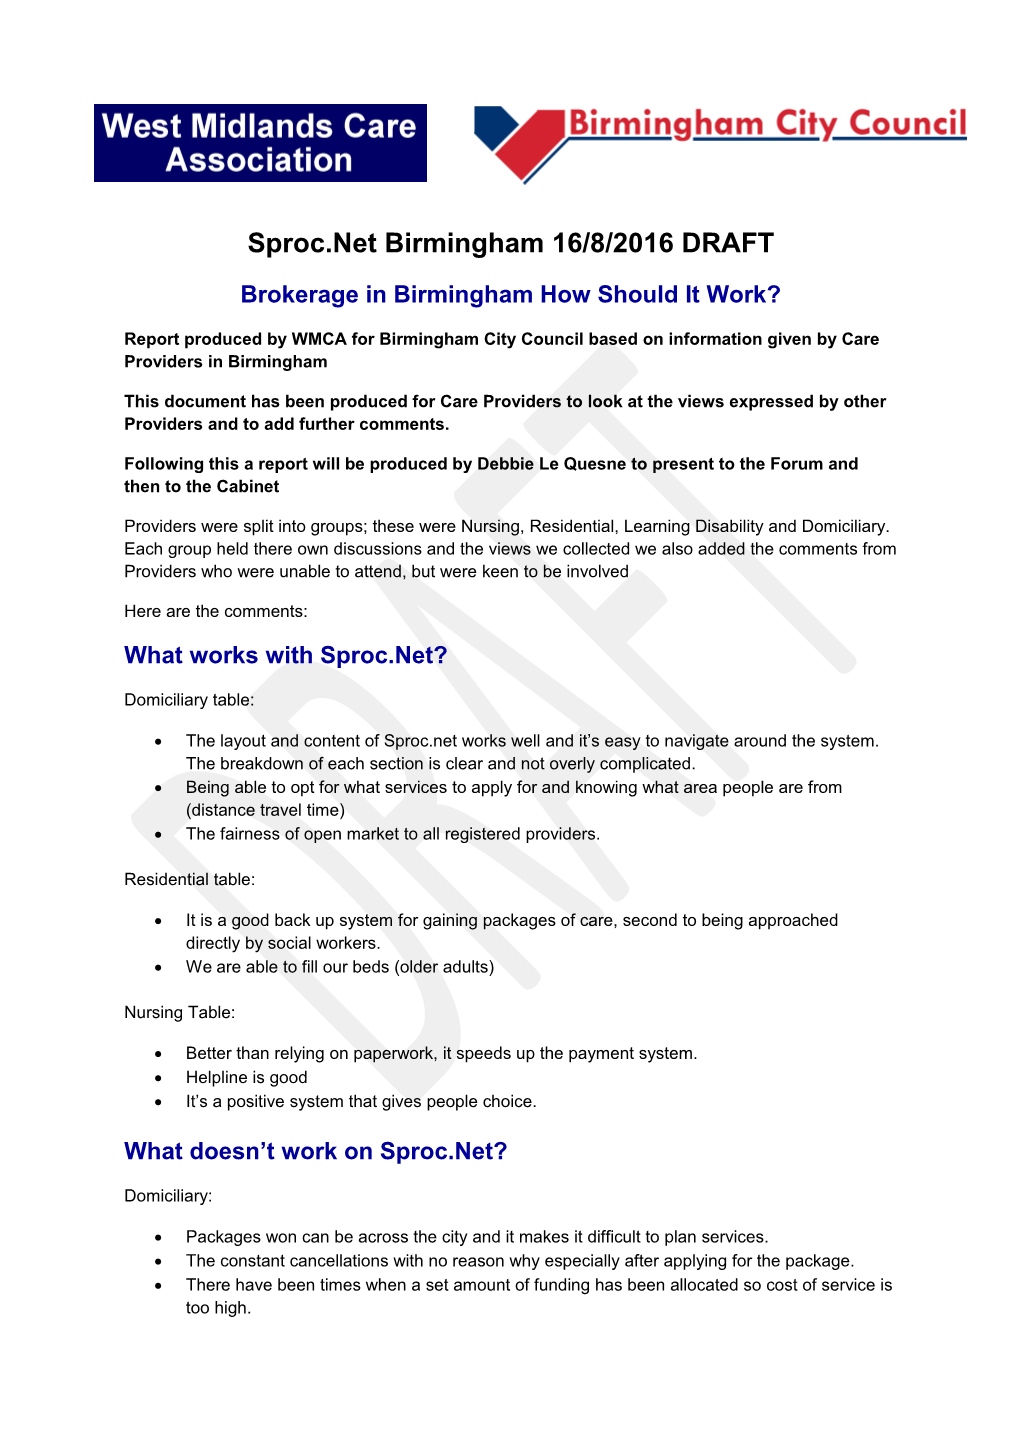 Notes from Discussions at Brokerage in Birmingham How Should It Work